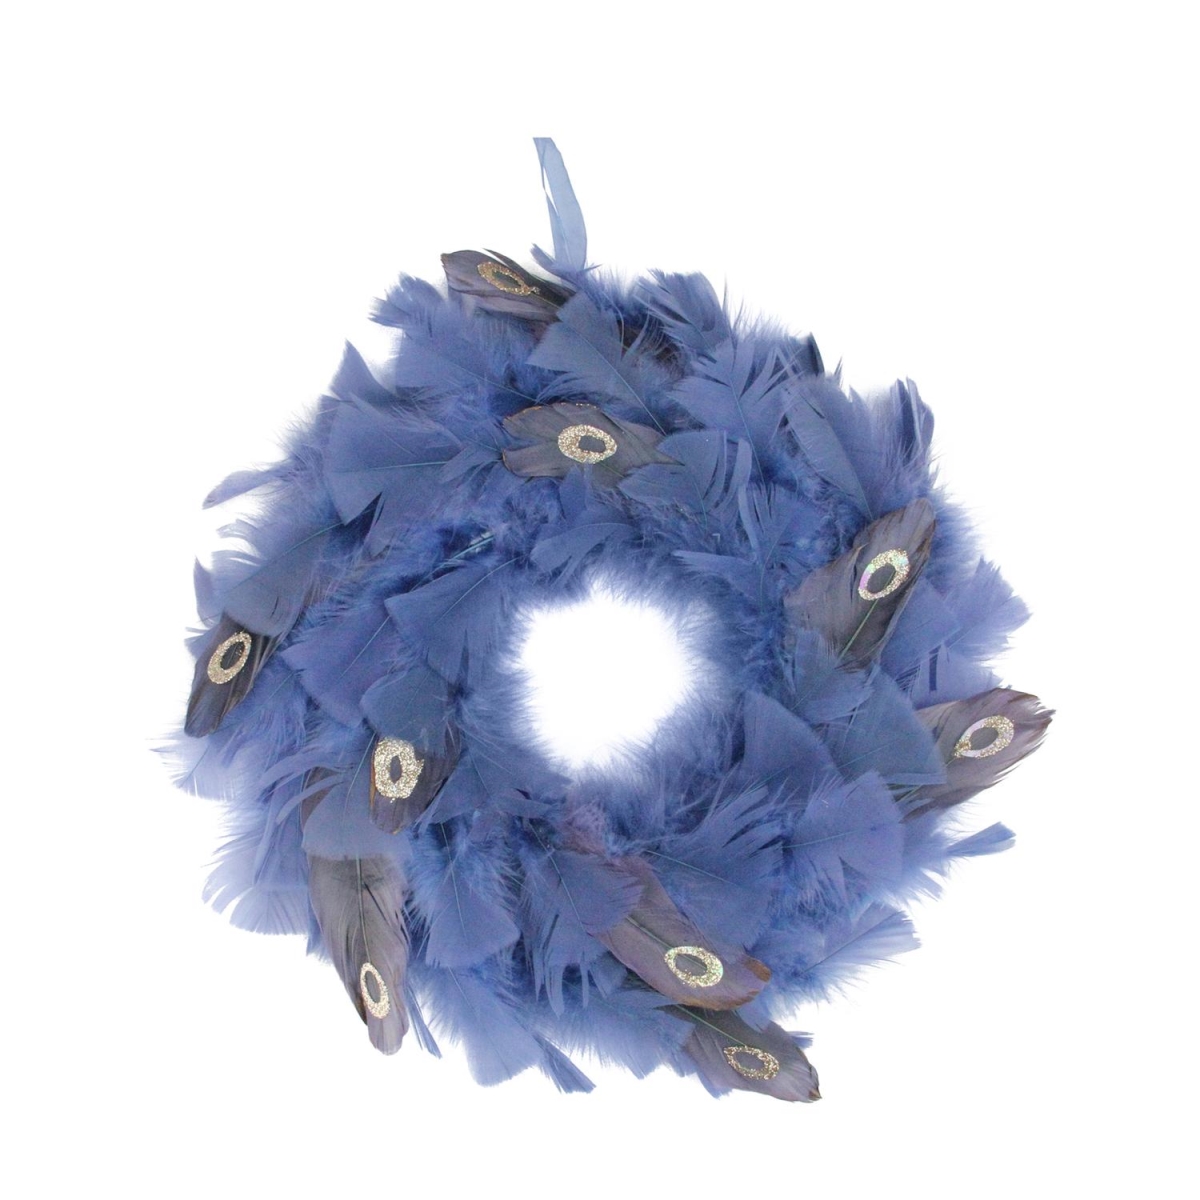 32638314 12 In. Regal Peacock Embellished Blue Feather Artificial Christmas Wreath - Unlit